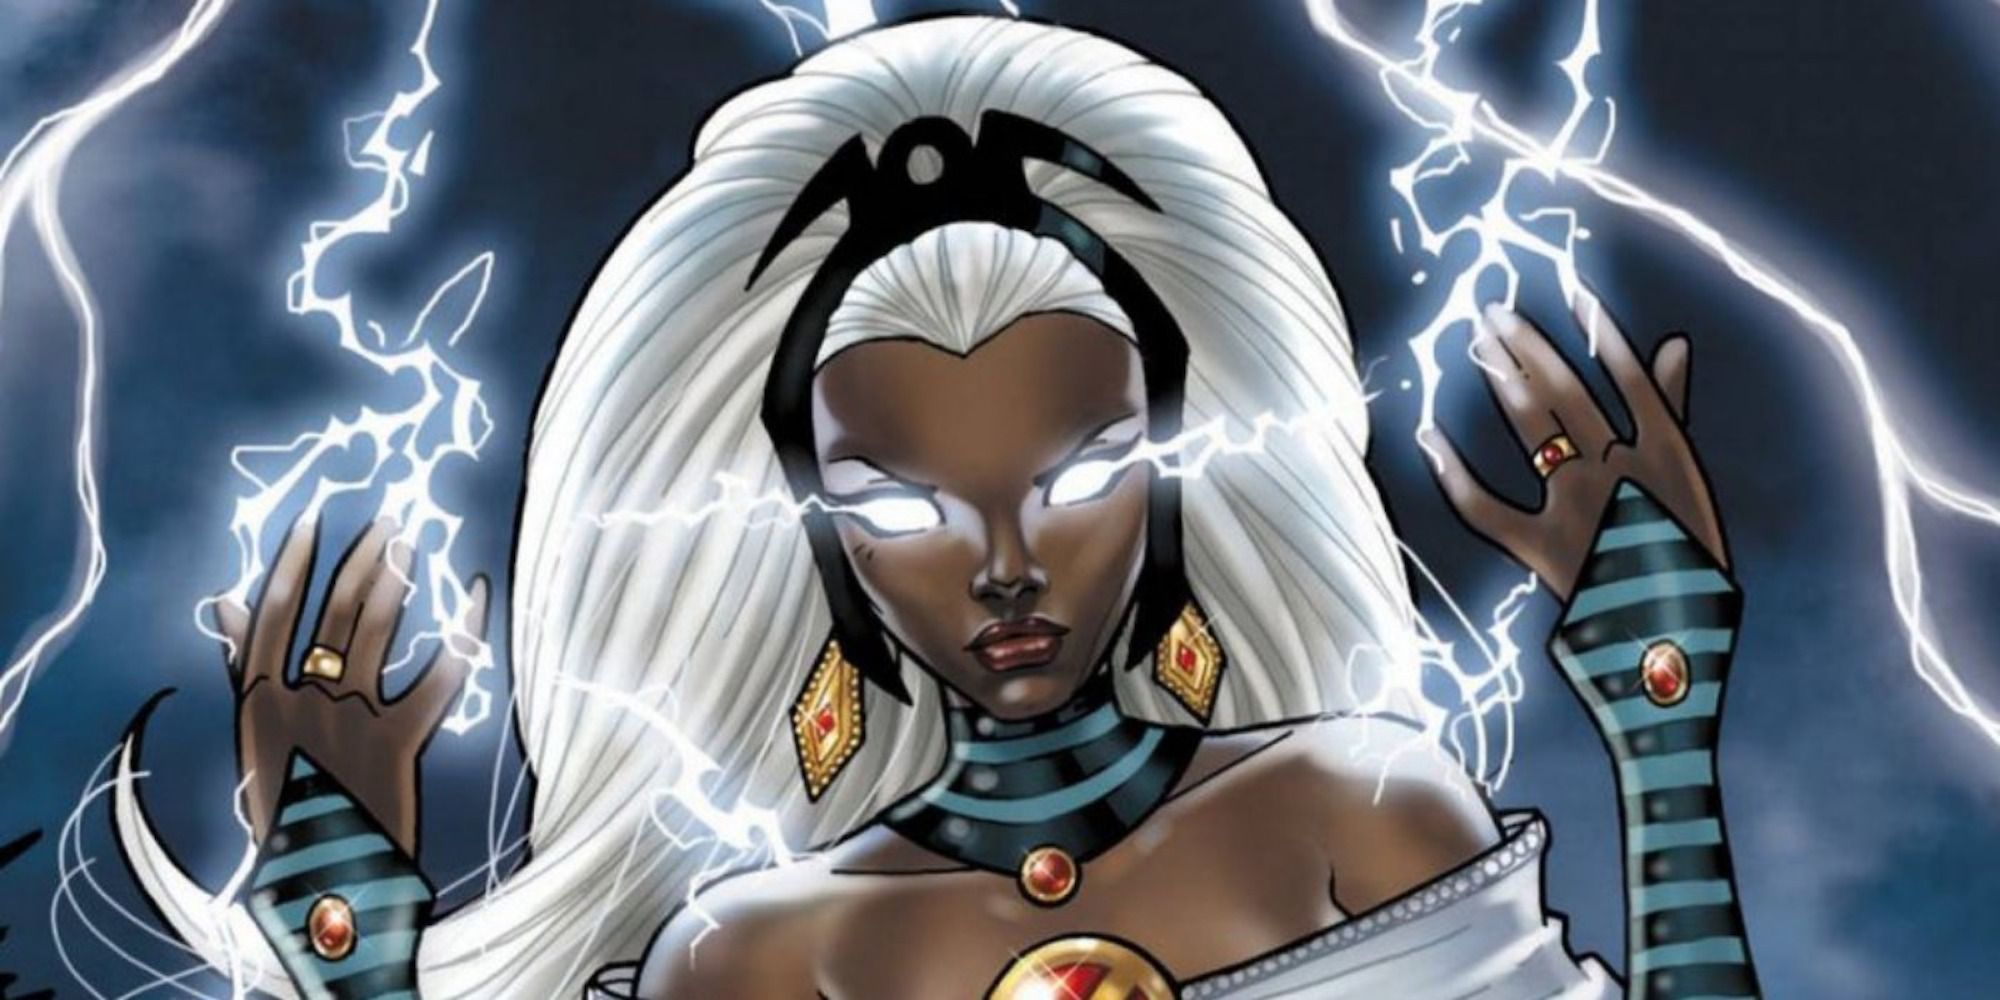 Storm from the comics